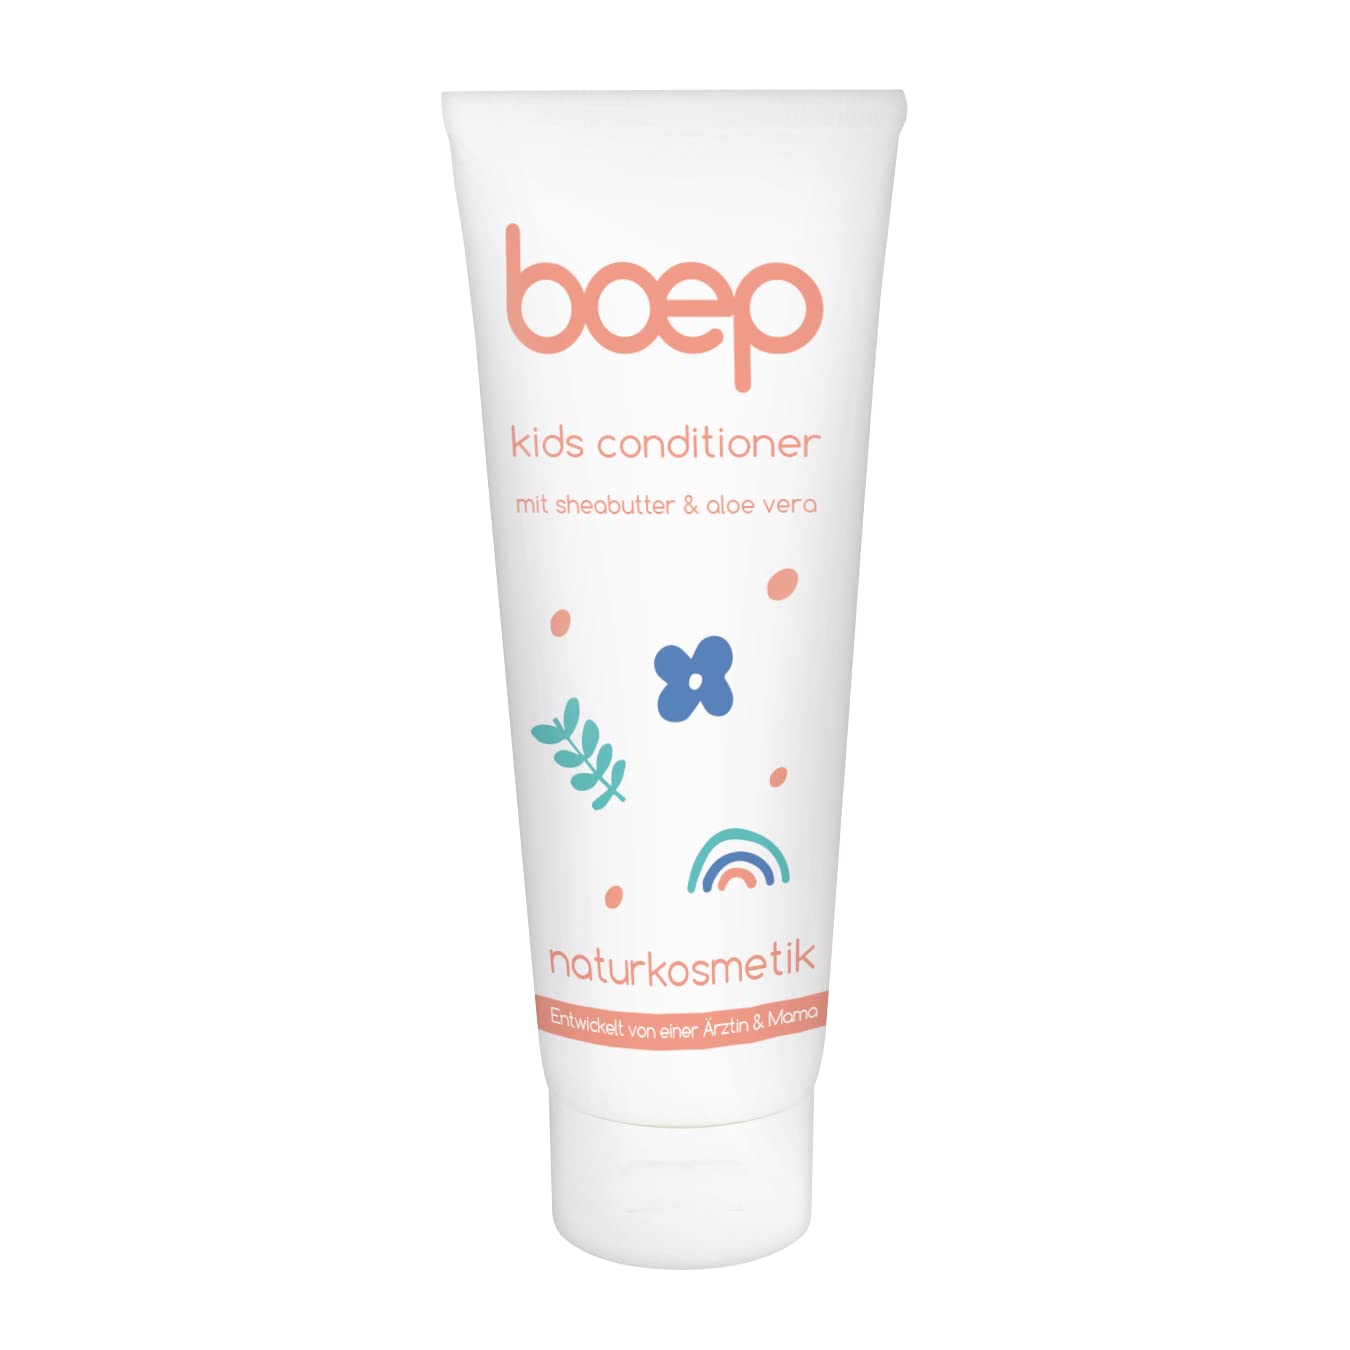 boep Kids Conditioner for Children, Nourishing Natural Cosmetics Hair Conditioner, Moisturises and Ensures Better Combability (100 ml)